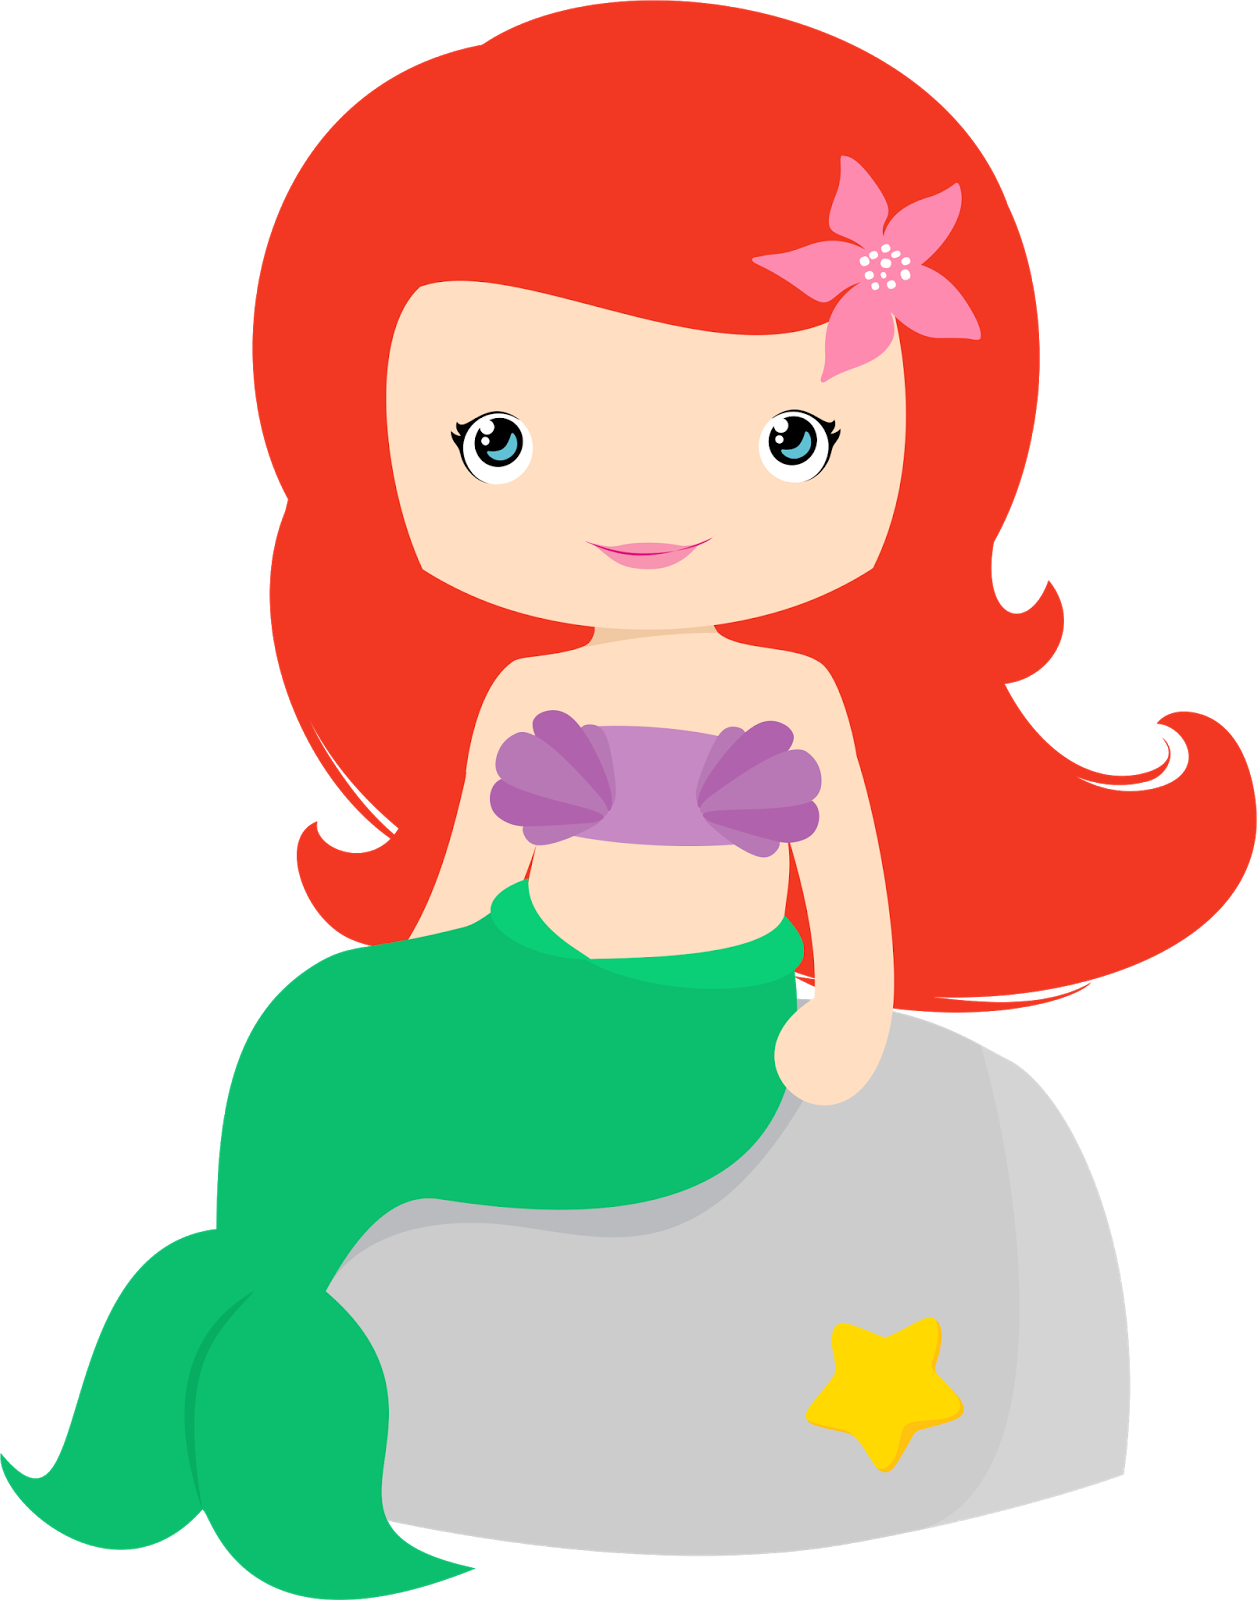 Pin by goovanna brice. Numbers clipart mermaid